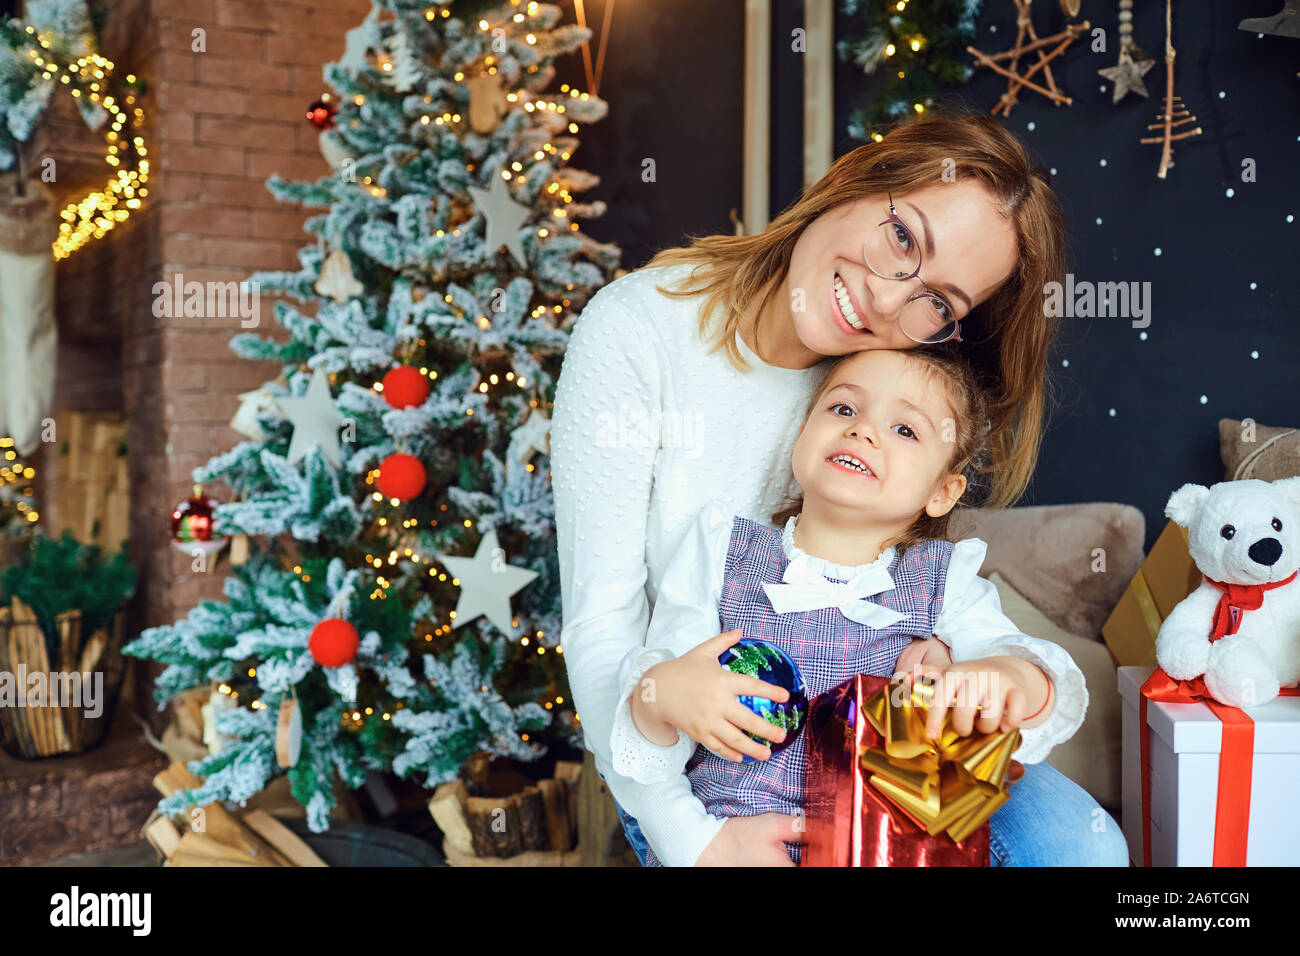 Mother and daughter hugging by the Christmas tree. Stock Photo